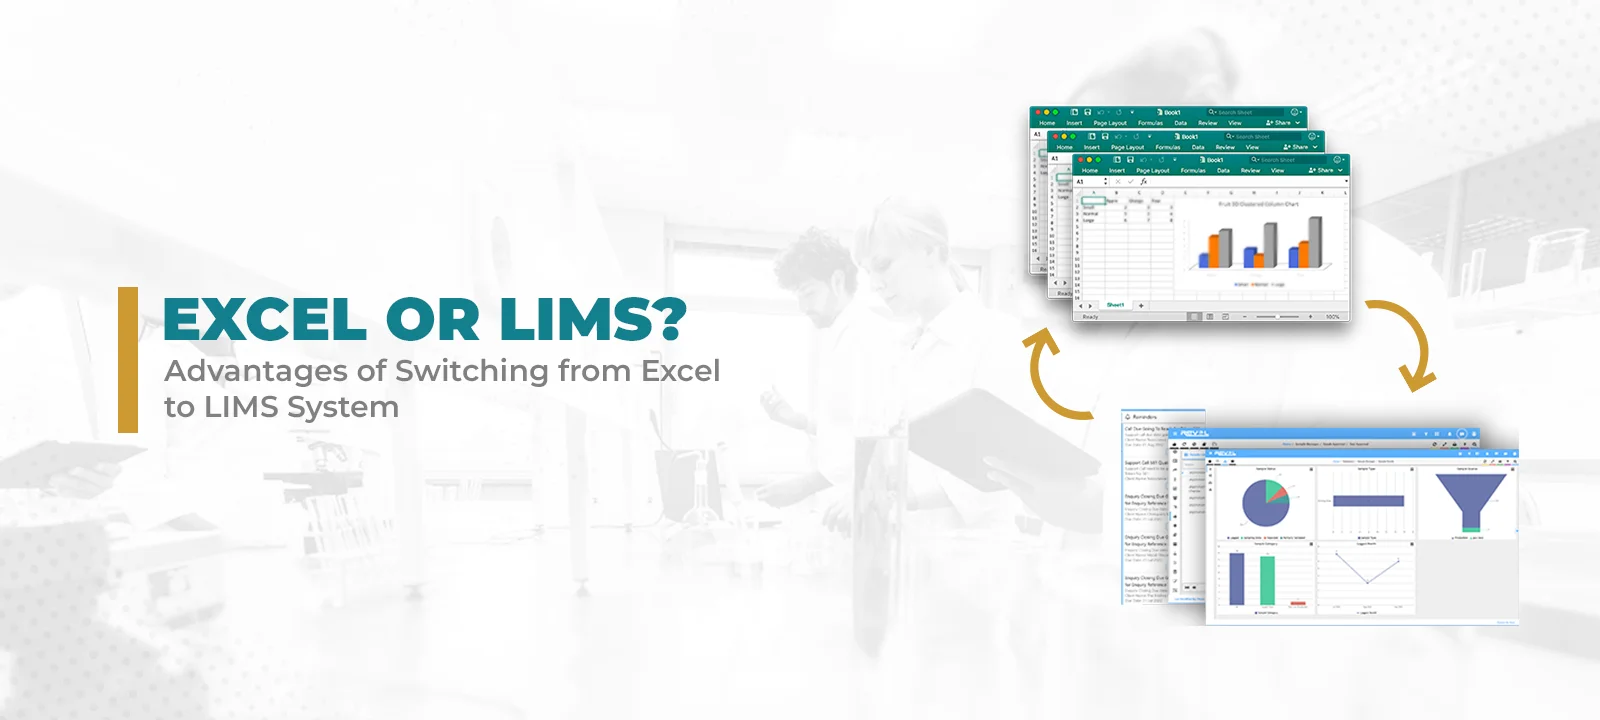 An image showcases a comparison between Excel and LIMS (Laboratory Information Management System) with  icons representing Excel spreadsheets and LIMS functionalities.